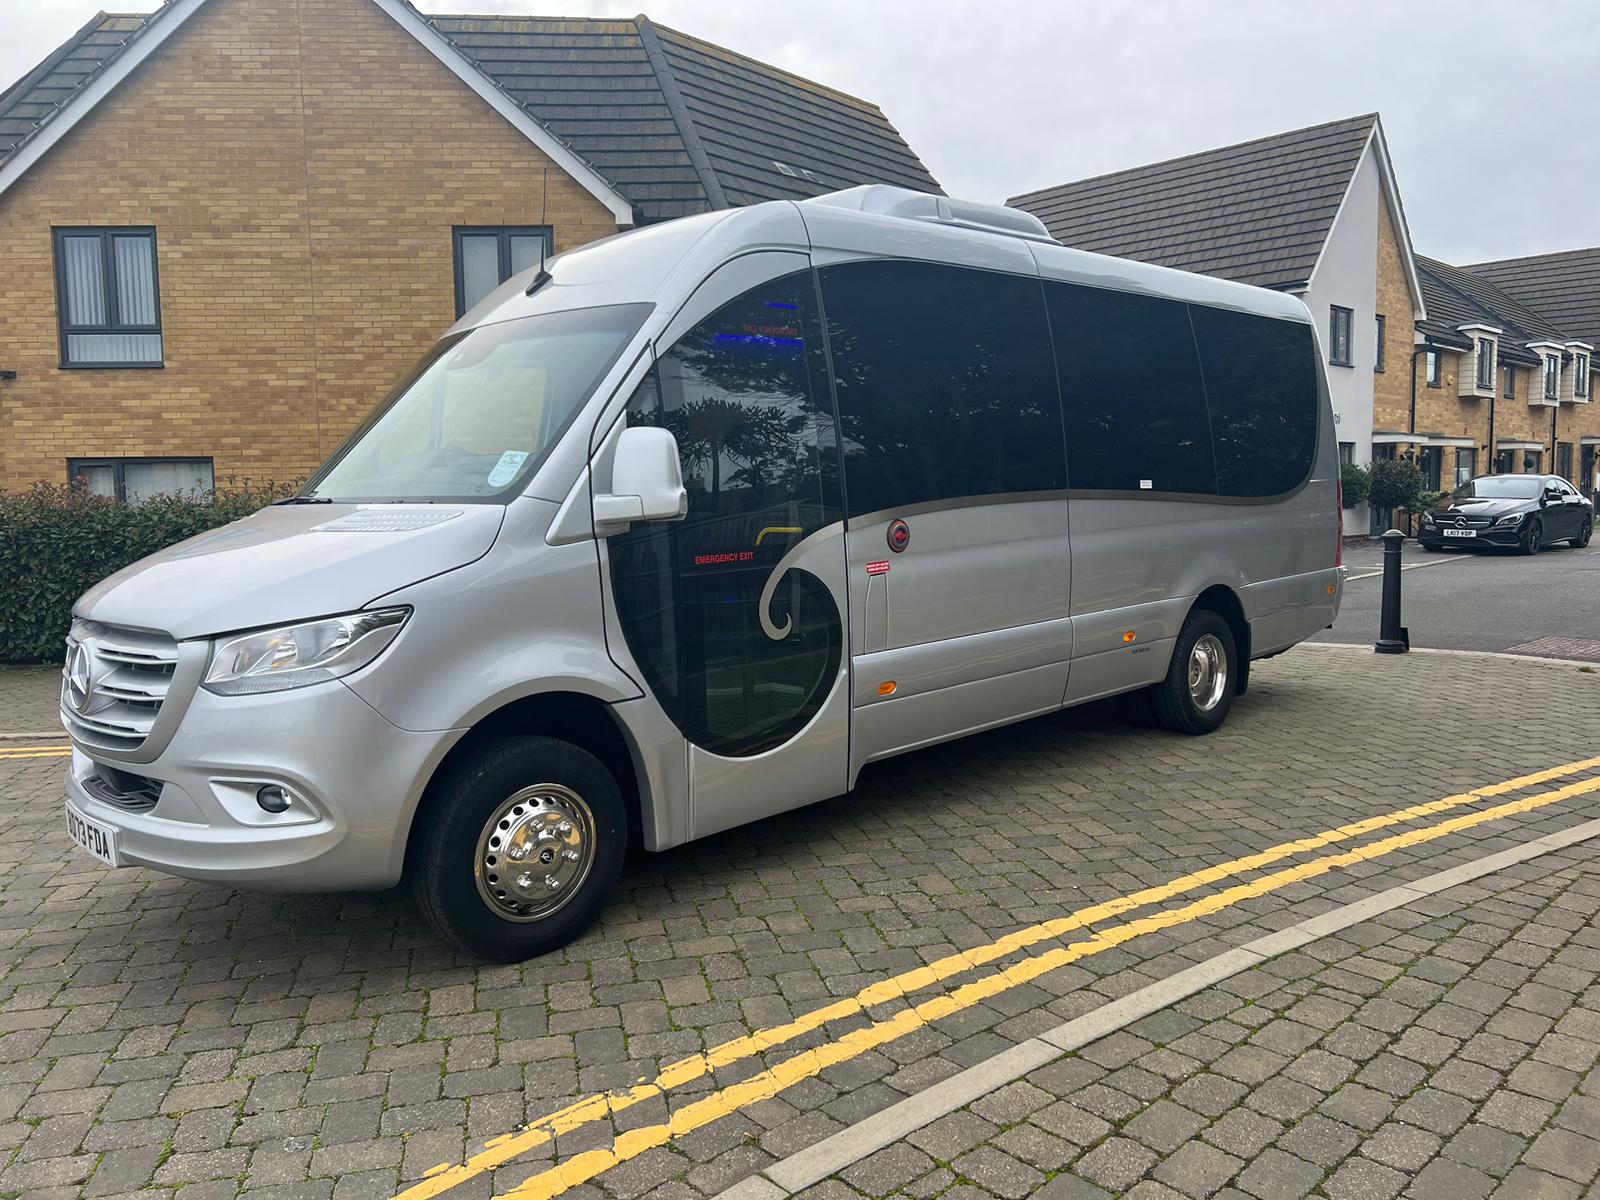 How to Find Affordable Minibus Hire in Bromyard and Herefordshire